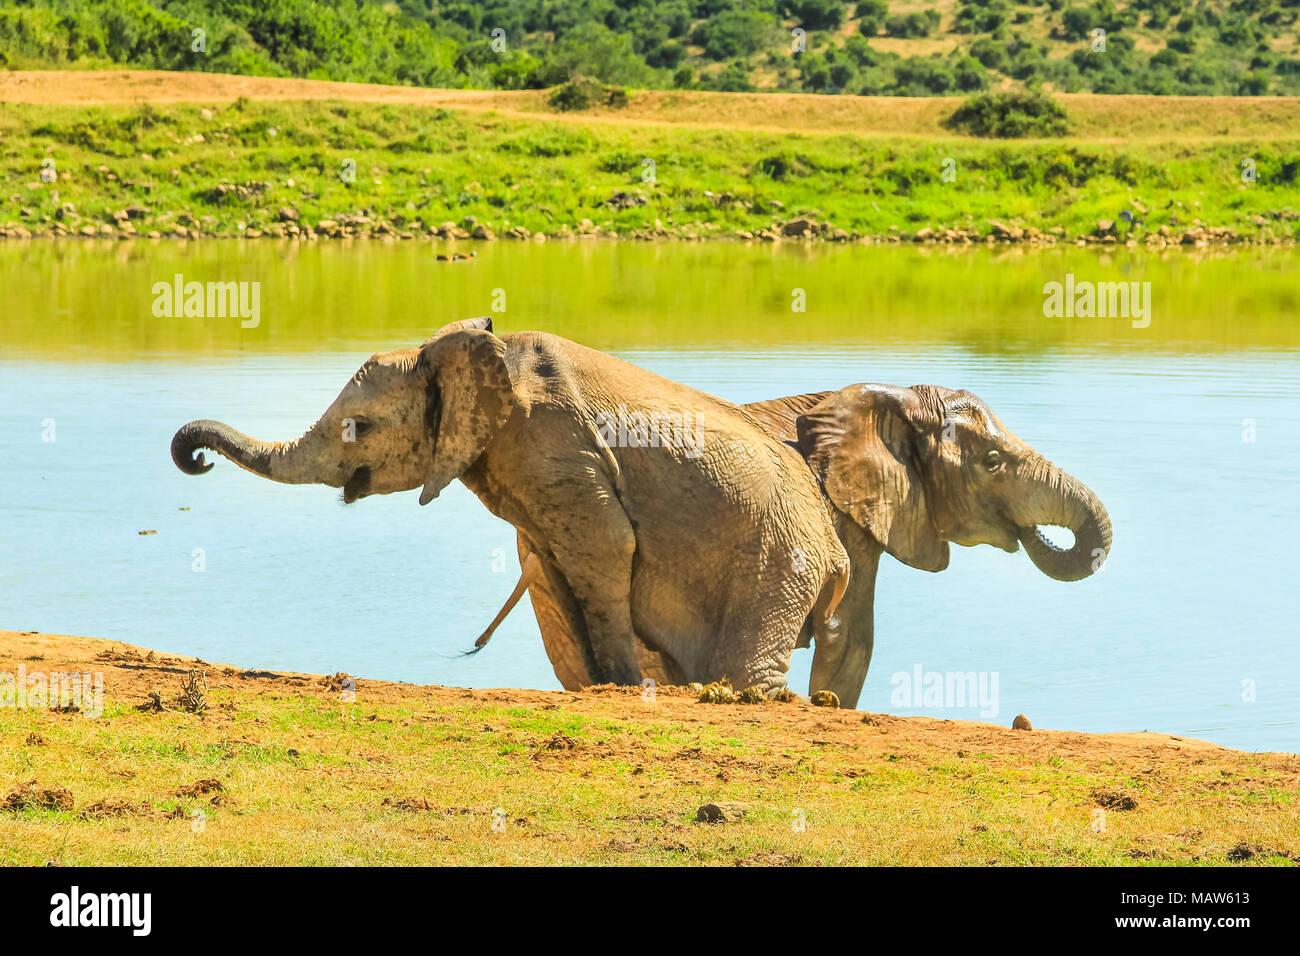 Two young African Elephants near a pool. Addo Elephant National Park, popular tourist destination for elephant safari and observation. Eastern Cape, South Africa. Summer season. Stock Photo